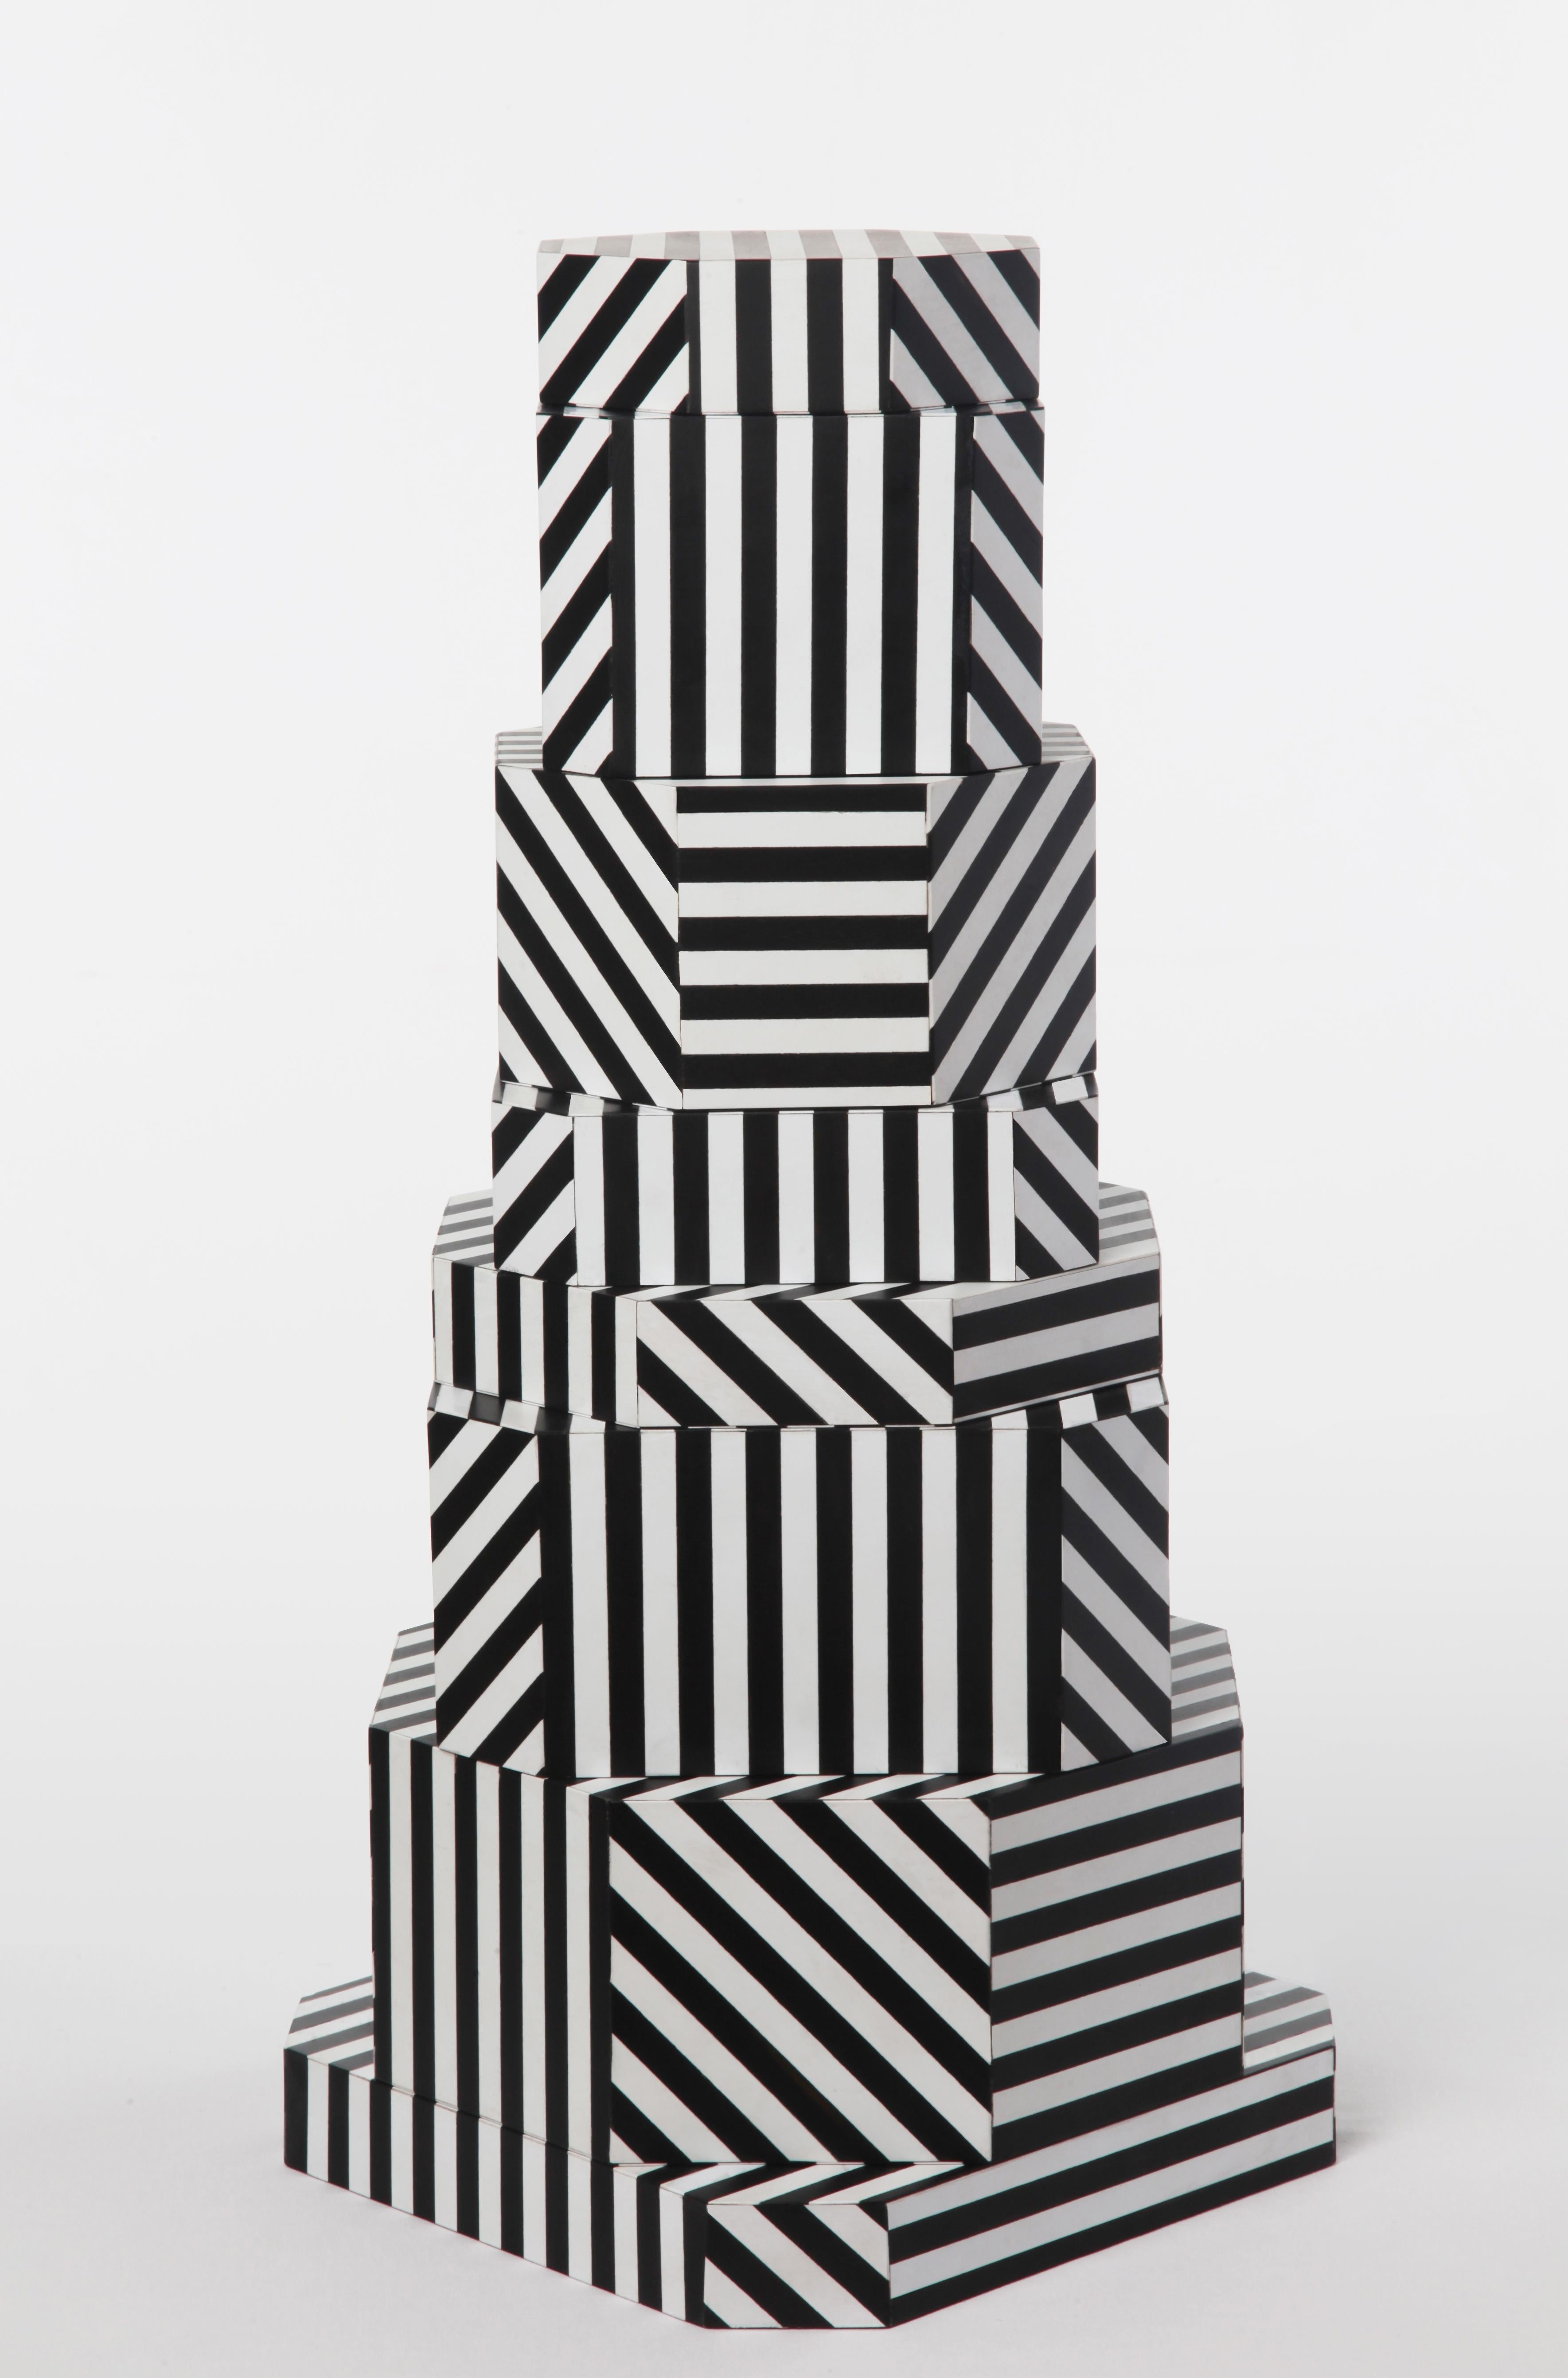 Black stripes ziggurat boxes by Oeuffice
Edition: 12 + 2AP
2012
Dimensions: 25 x 25 x 55 cm
Materials: Wood box, acrylic, solid stained wood.

The black stripes edition evokes bold and linear details akin to Optical
Art. With a rich inlaid